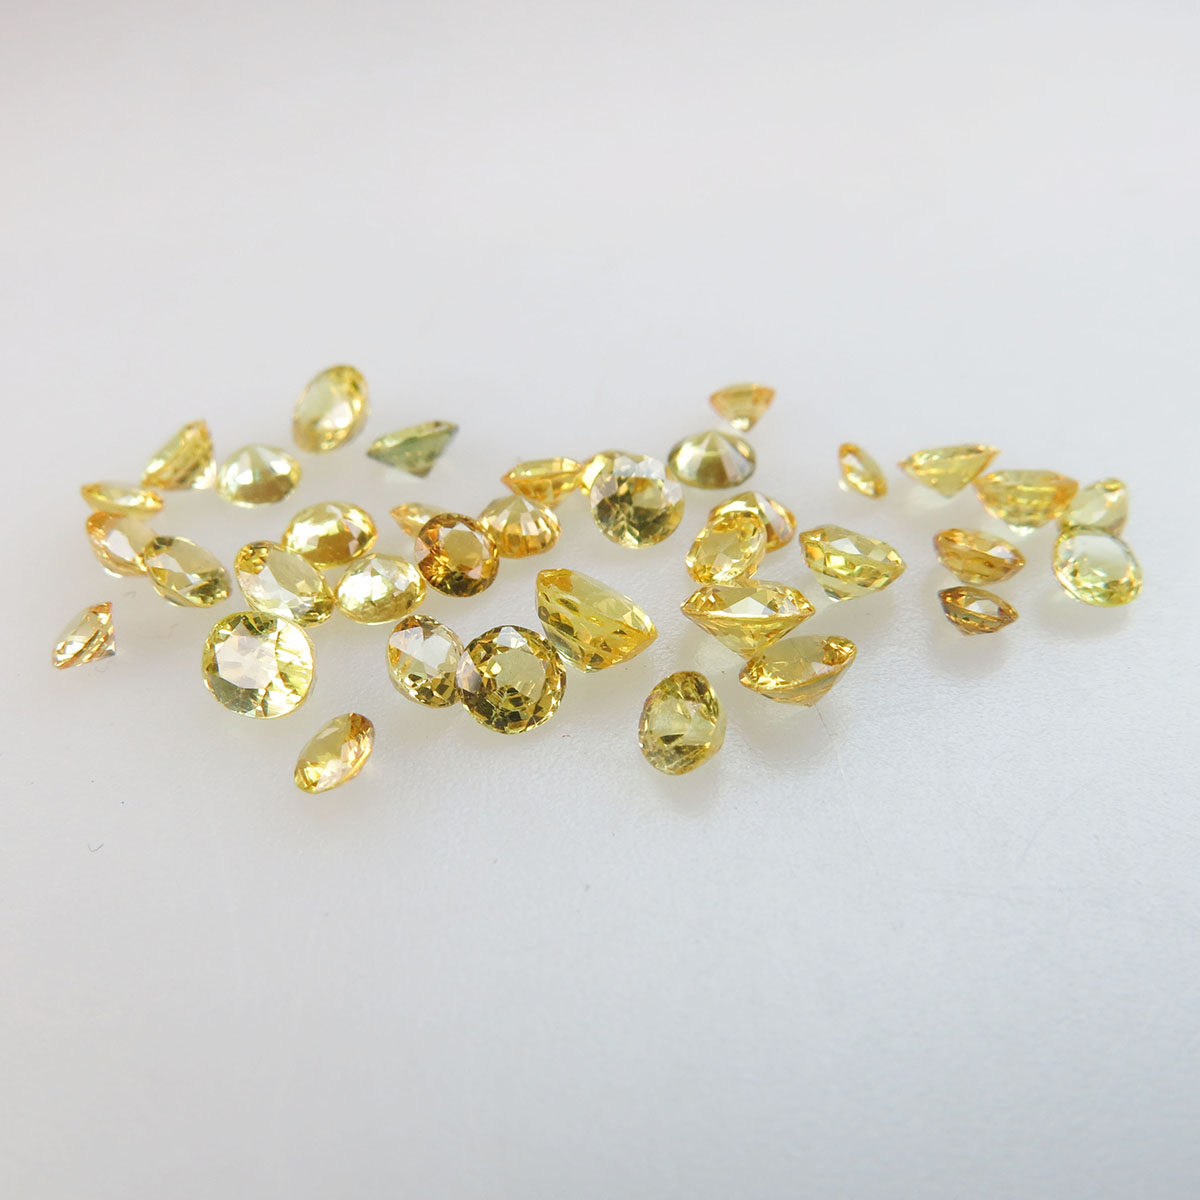 37 Small Round And Oval Cut Yellow Sapphires